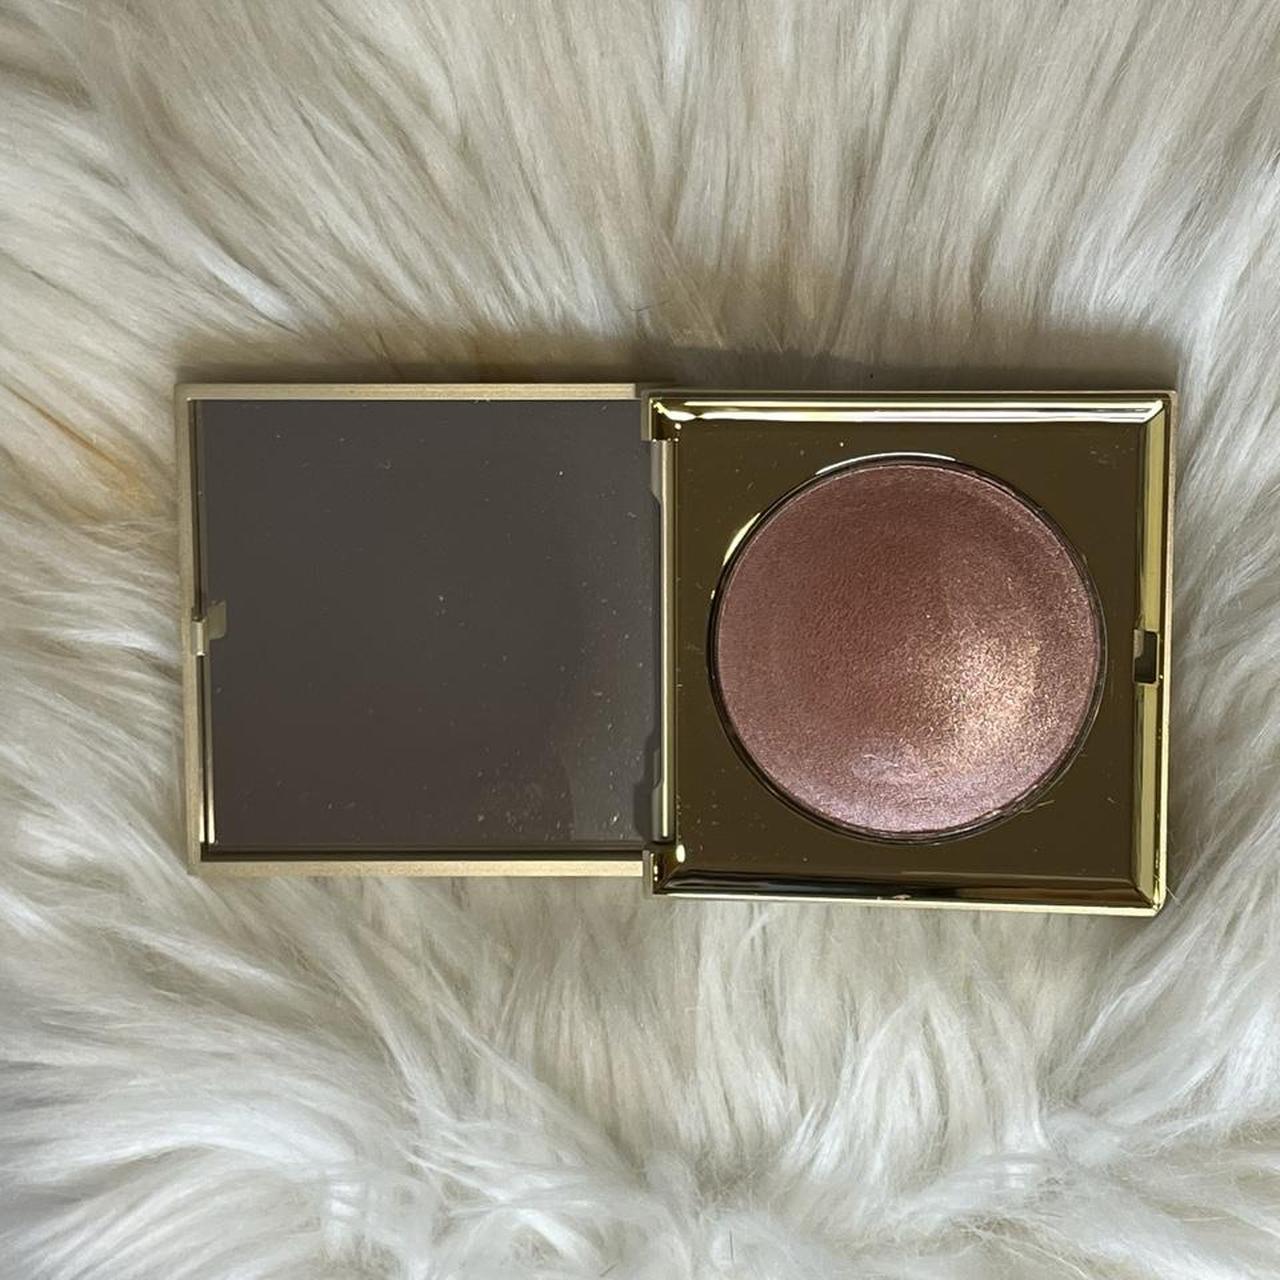 Product Image 2 - Stila Heaven’s Hue Highlighter
In shade